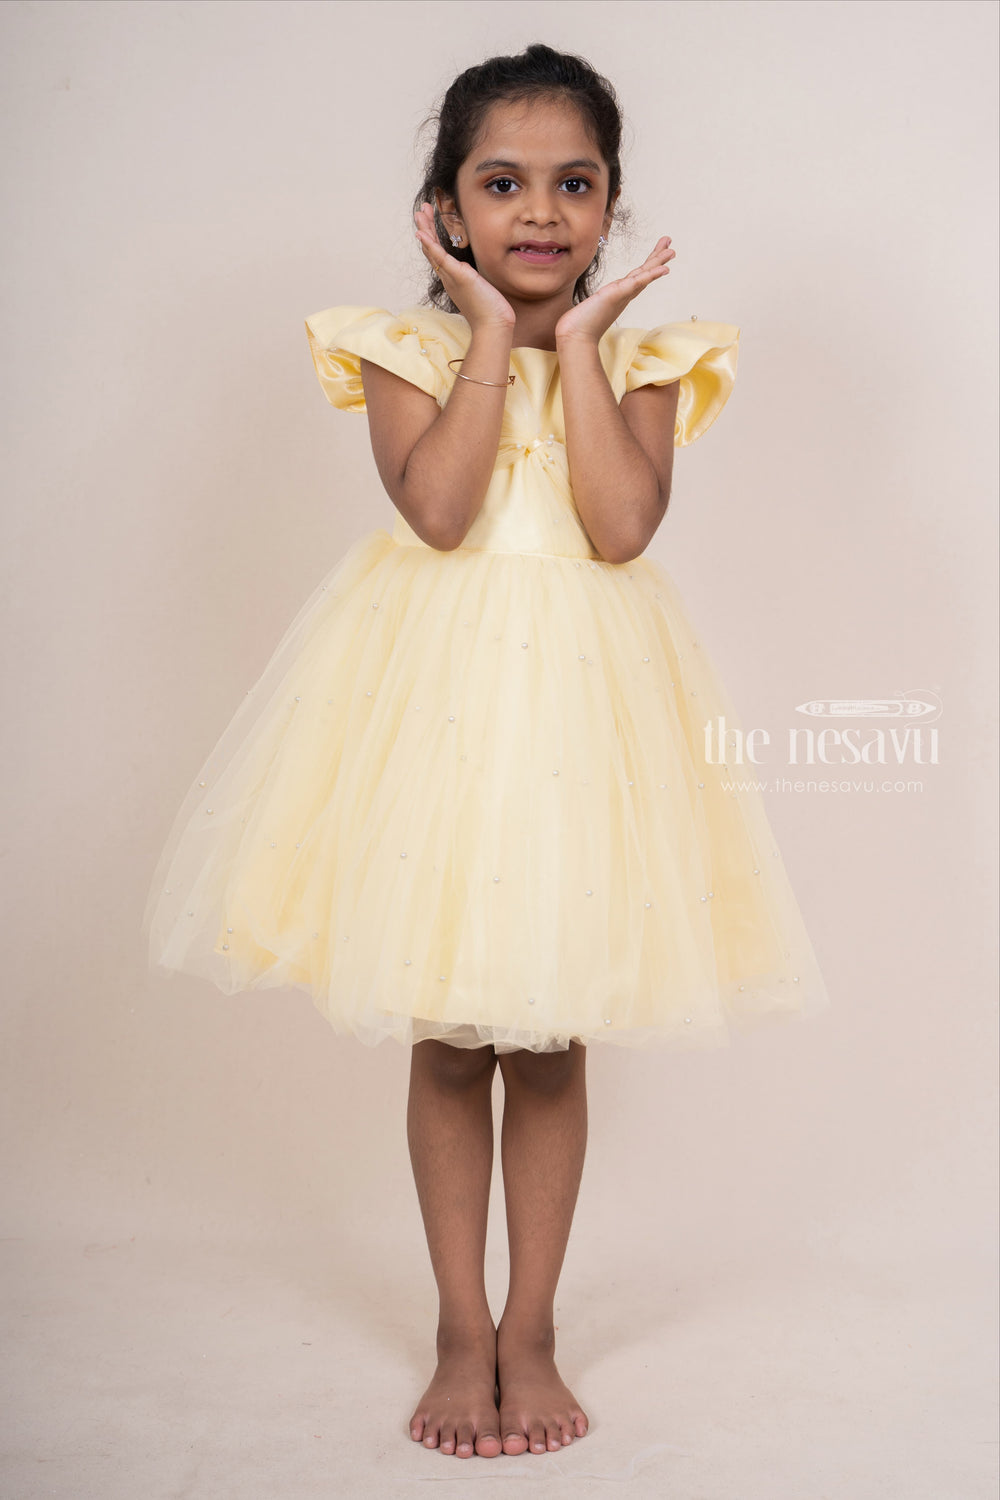 The Nesavu Party Frock Yellow With Bow Trimmed Party Gown For Baby Girls psr silks Nesavu